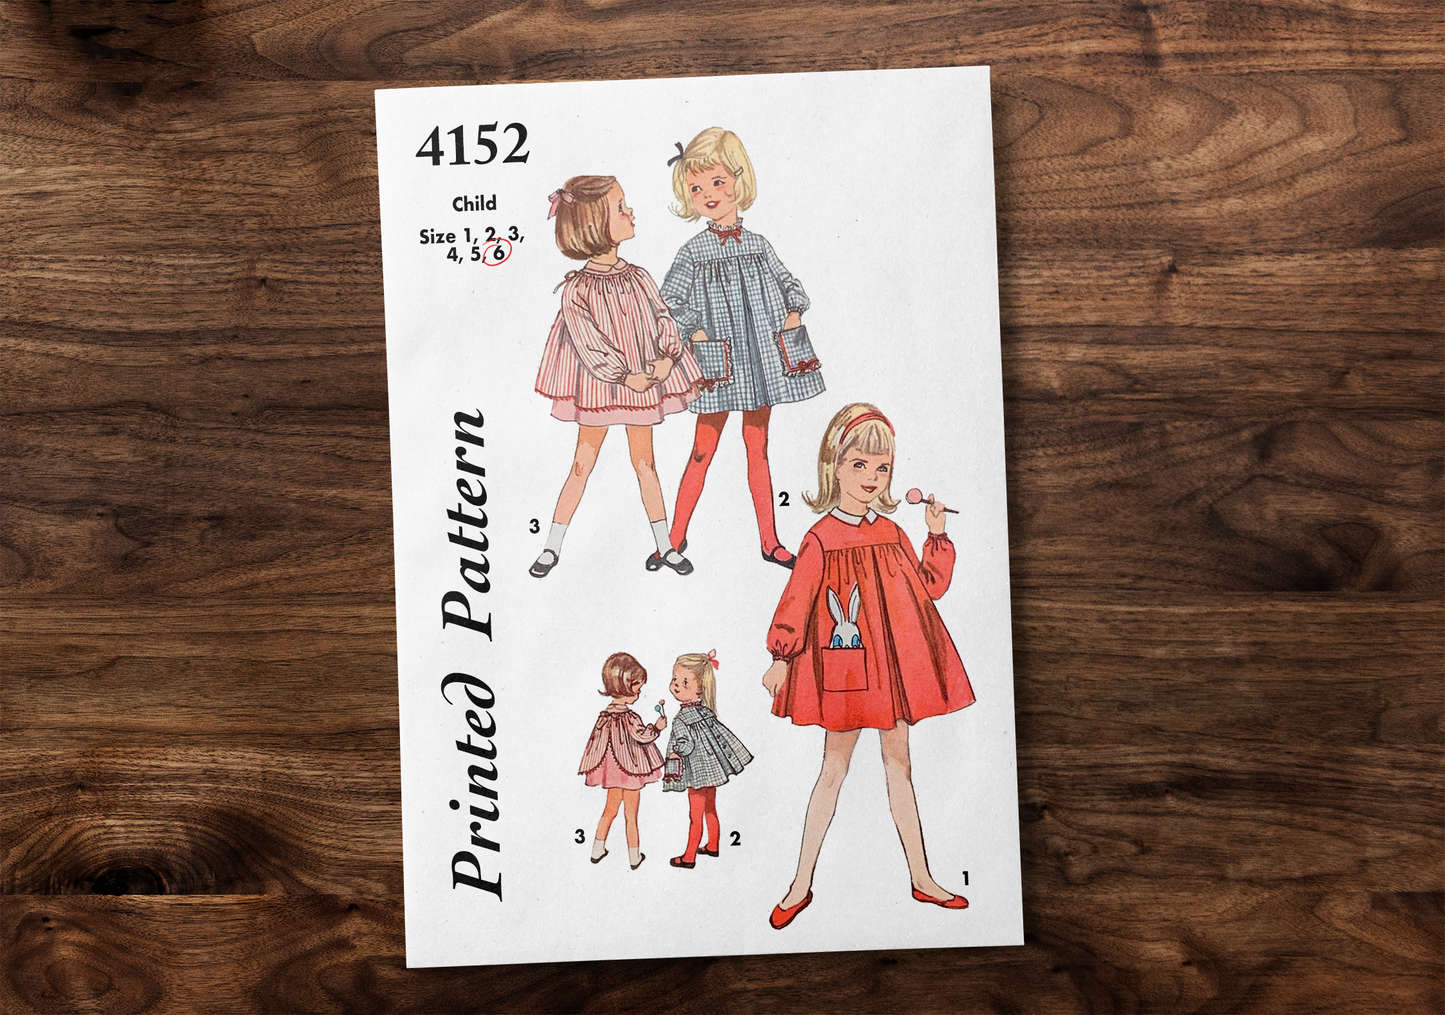 4152SP - Girls 1960s Art Smock Dress with Bunny Applique - Toddler Child Kids - *REPRODUCTION* - Available sizes: 1, 2, 3, 4, 5, 6 - Sewing Pattern